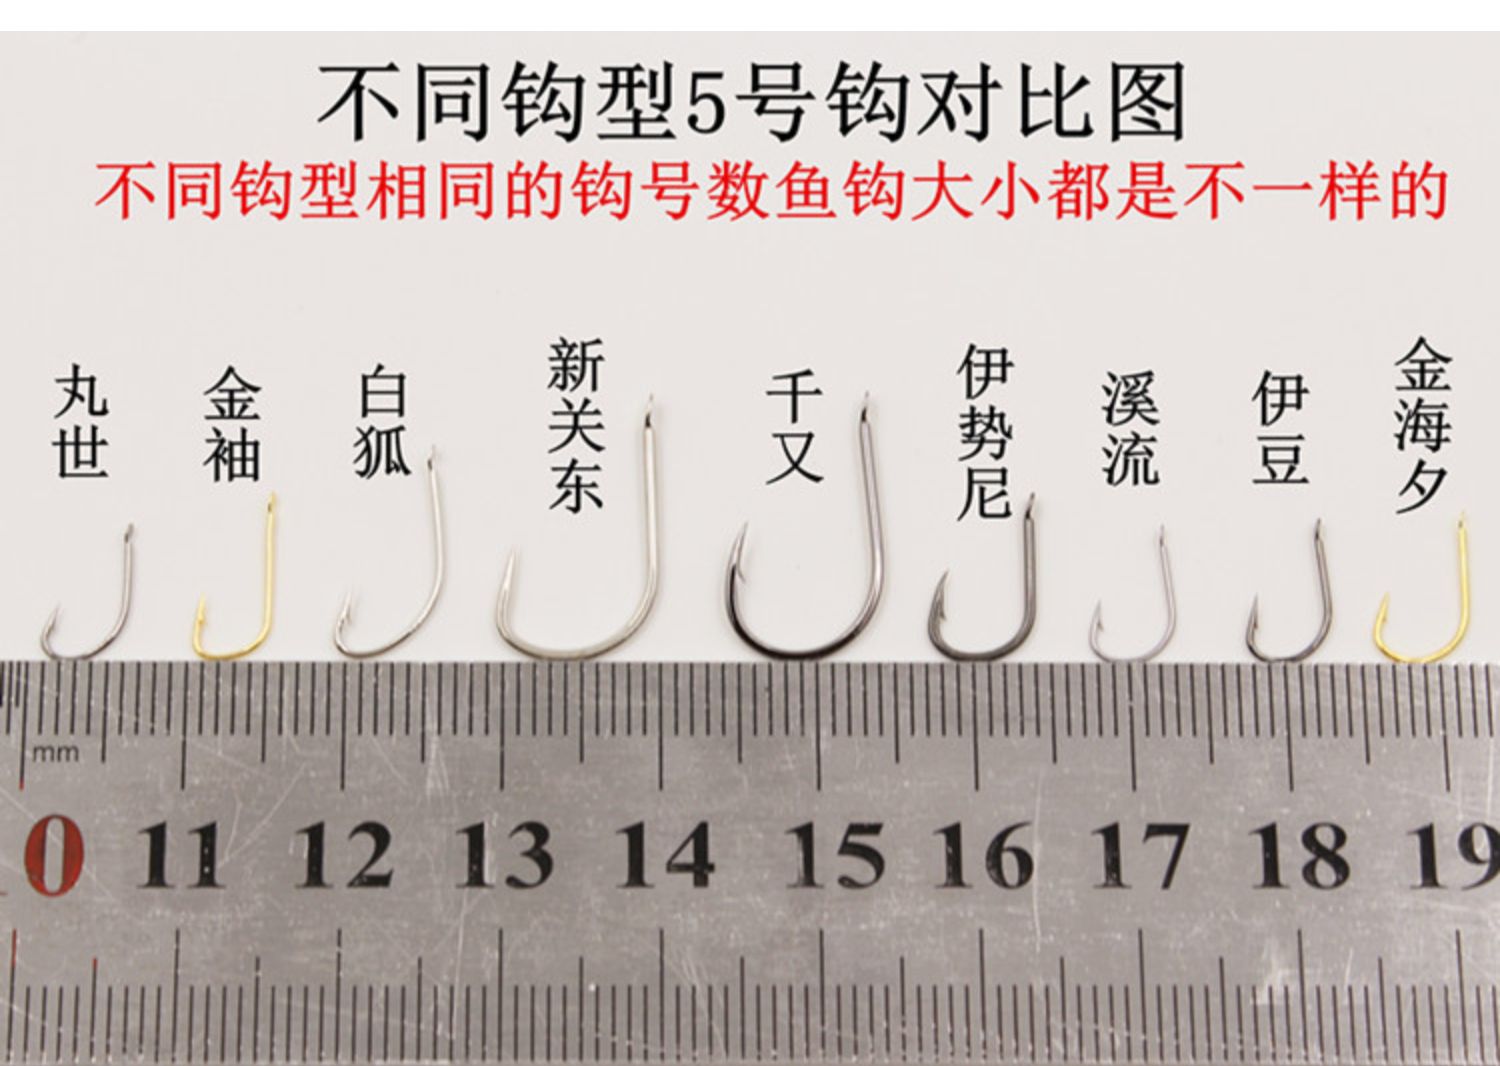 Japan imported white-sleeved fishhooks with barbs, small squid hooks  without barbs, and fishing gear supplies.